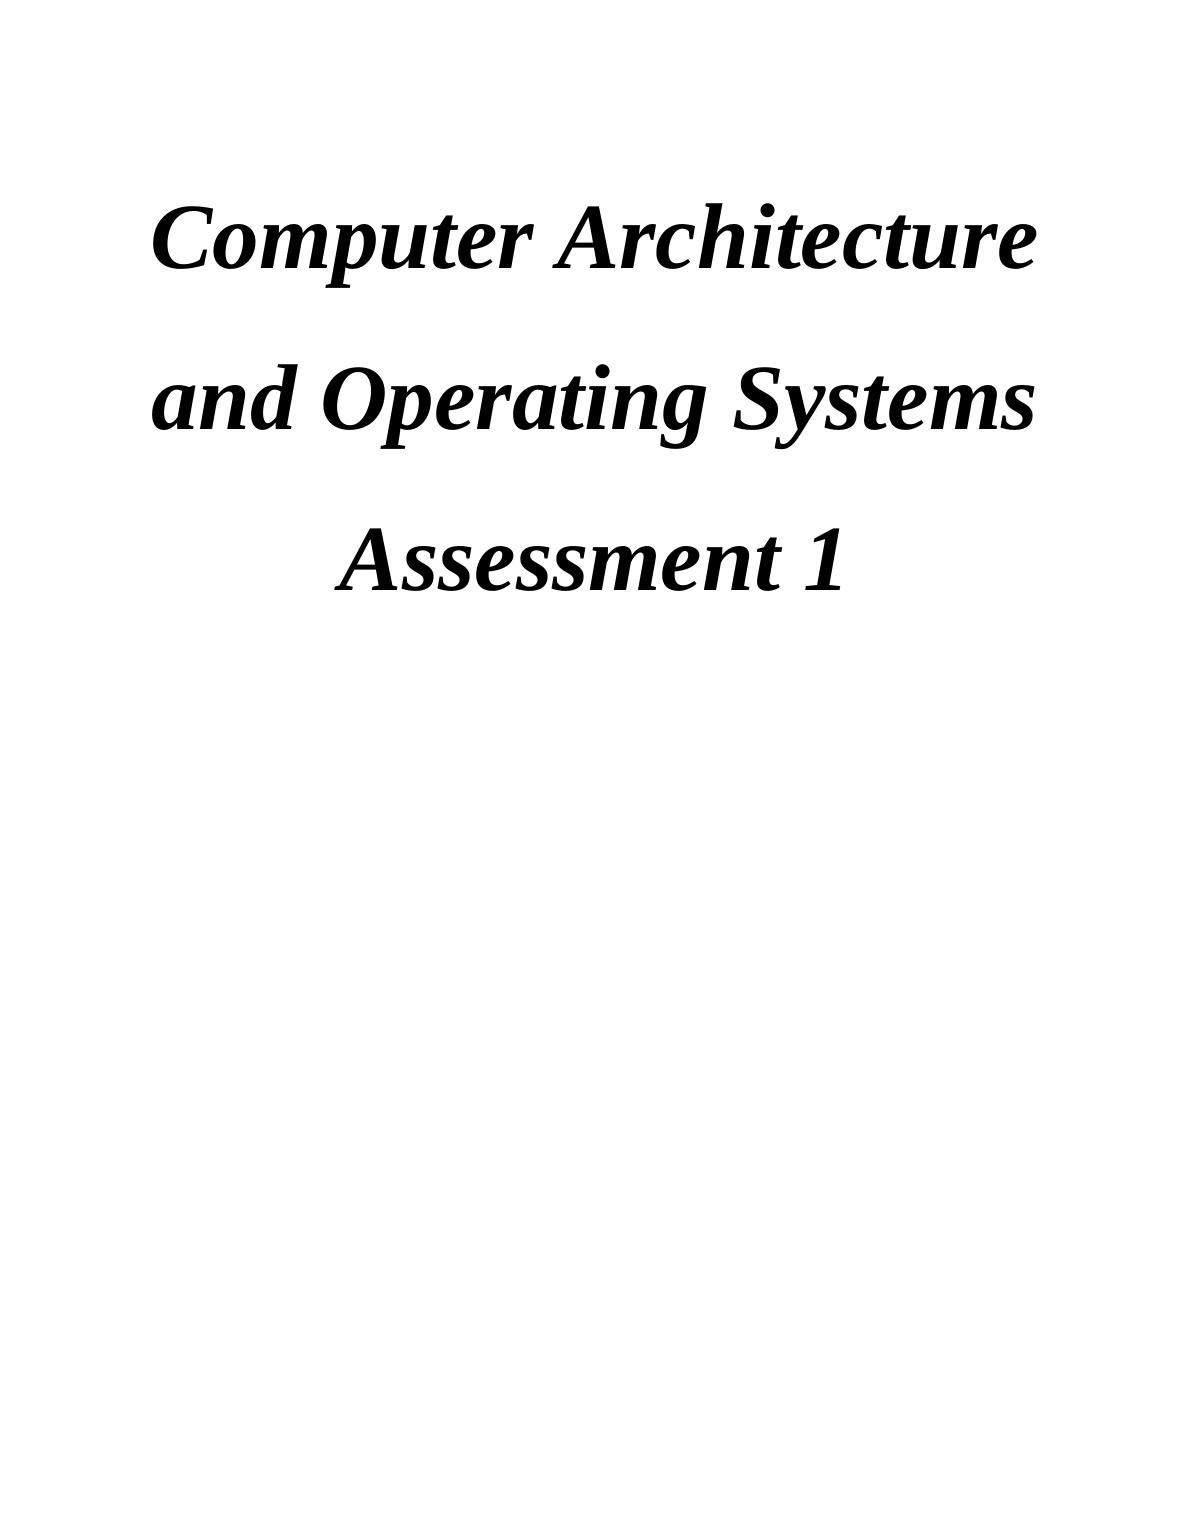 Computer Architecture and Operating Systems Assessment 1_1